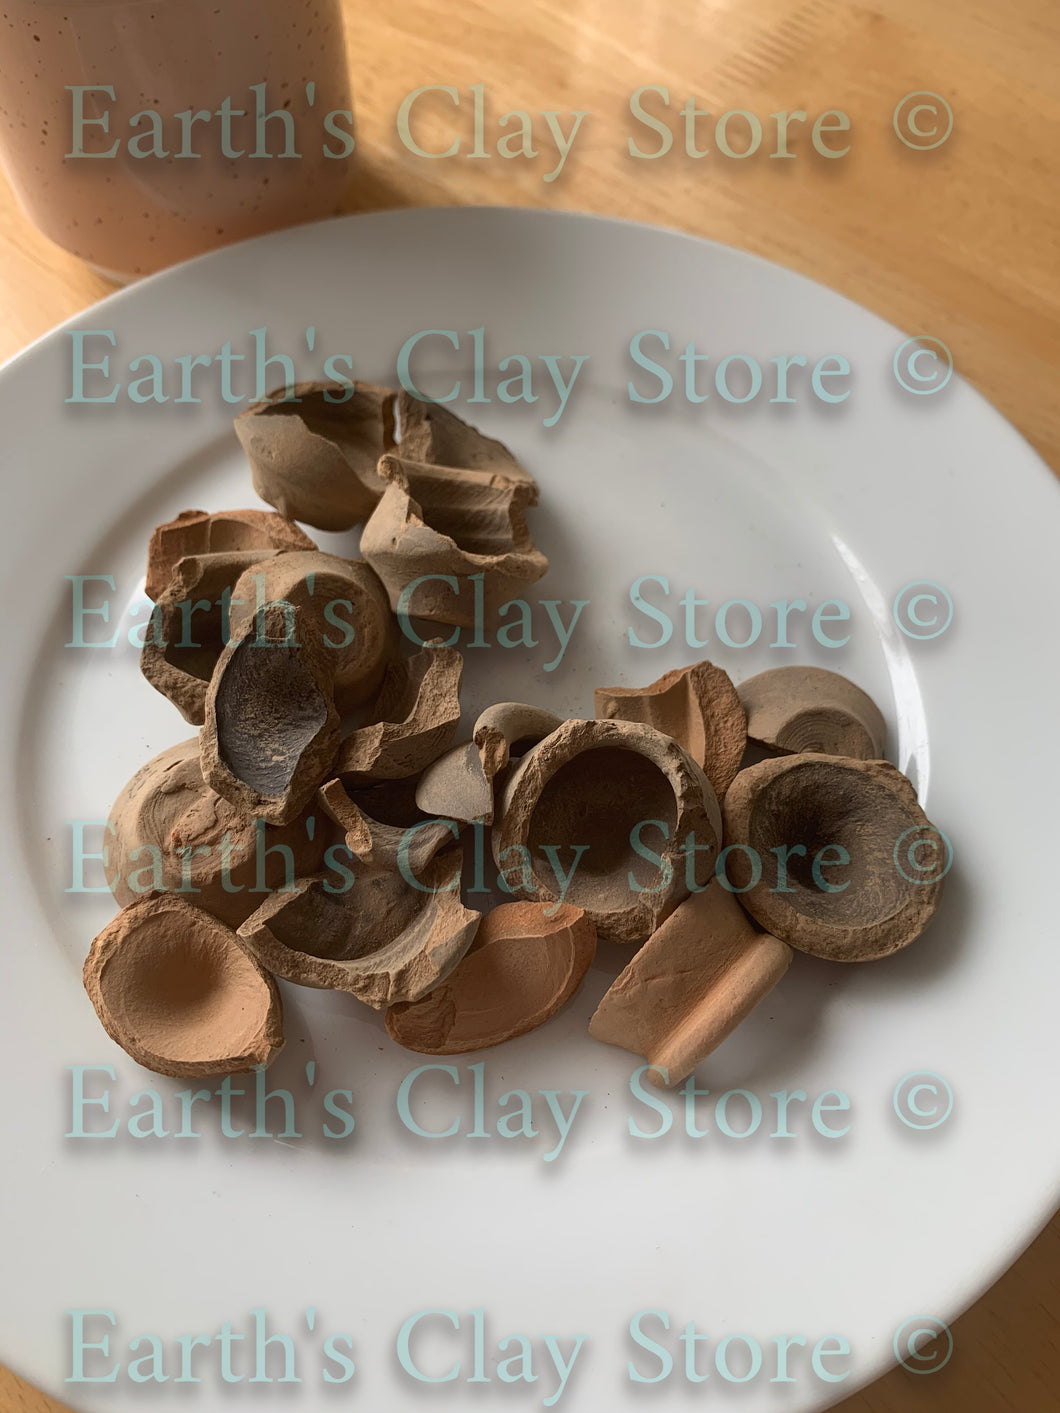 Brown Round Mini Clay Pots, For Cooking, Size: 125ml